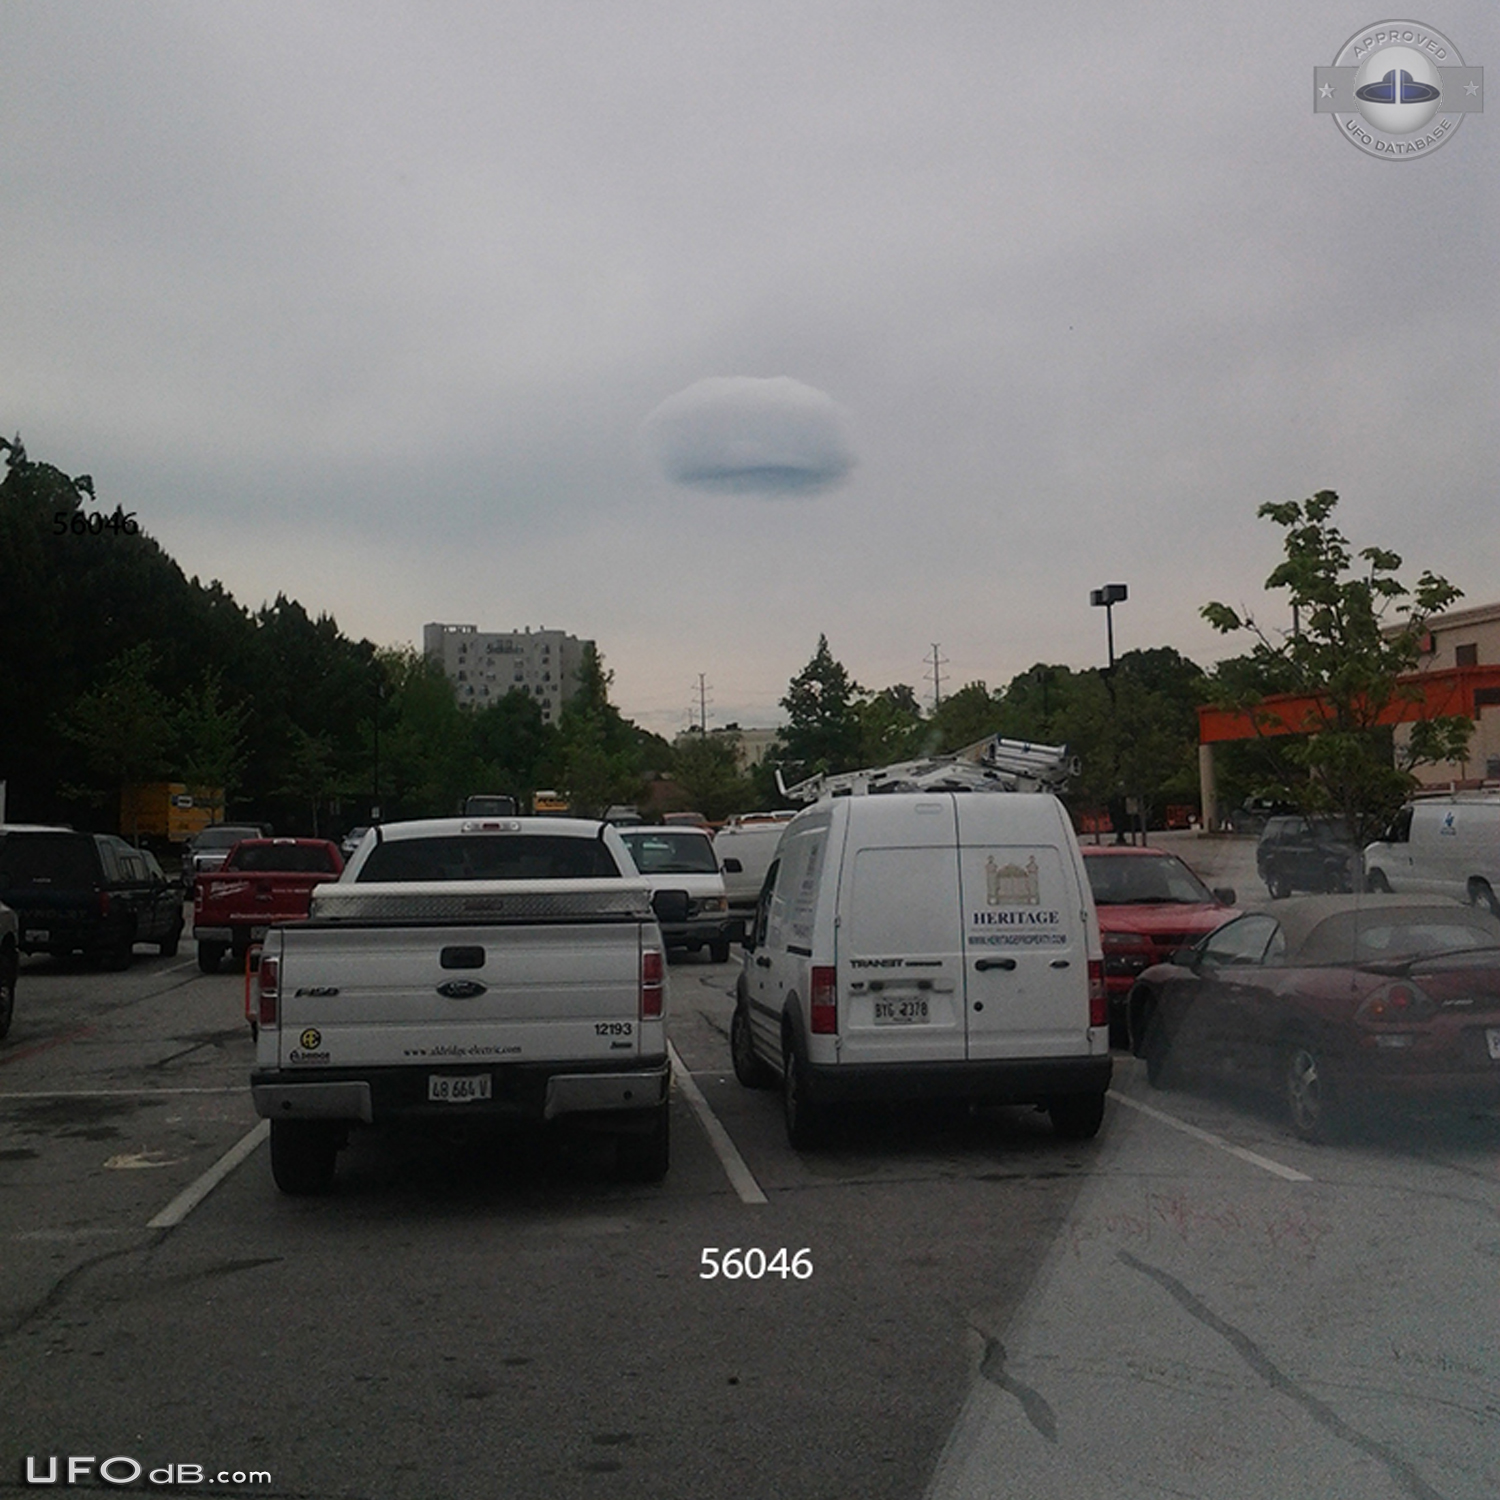 Cloud UFO over Atlanta reported to MUFON by 3 different witnesses 2014 UFO Picture #571-4